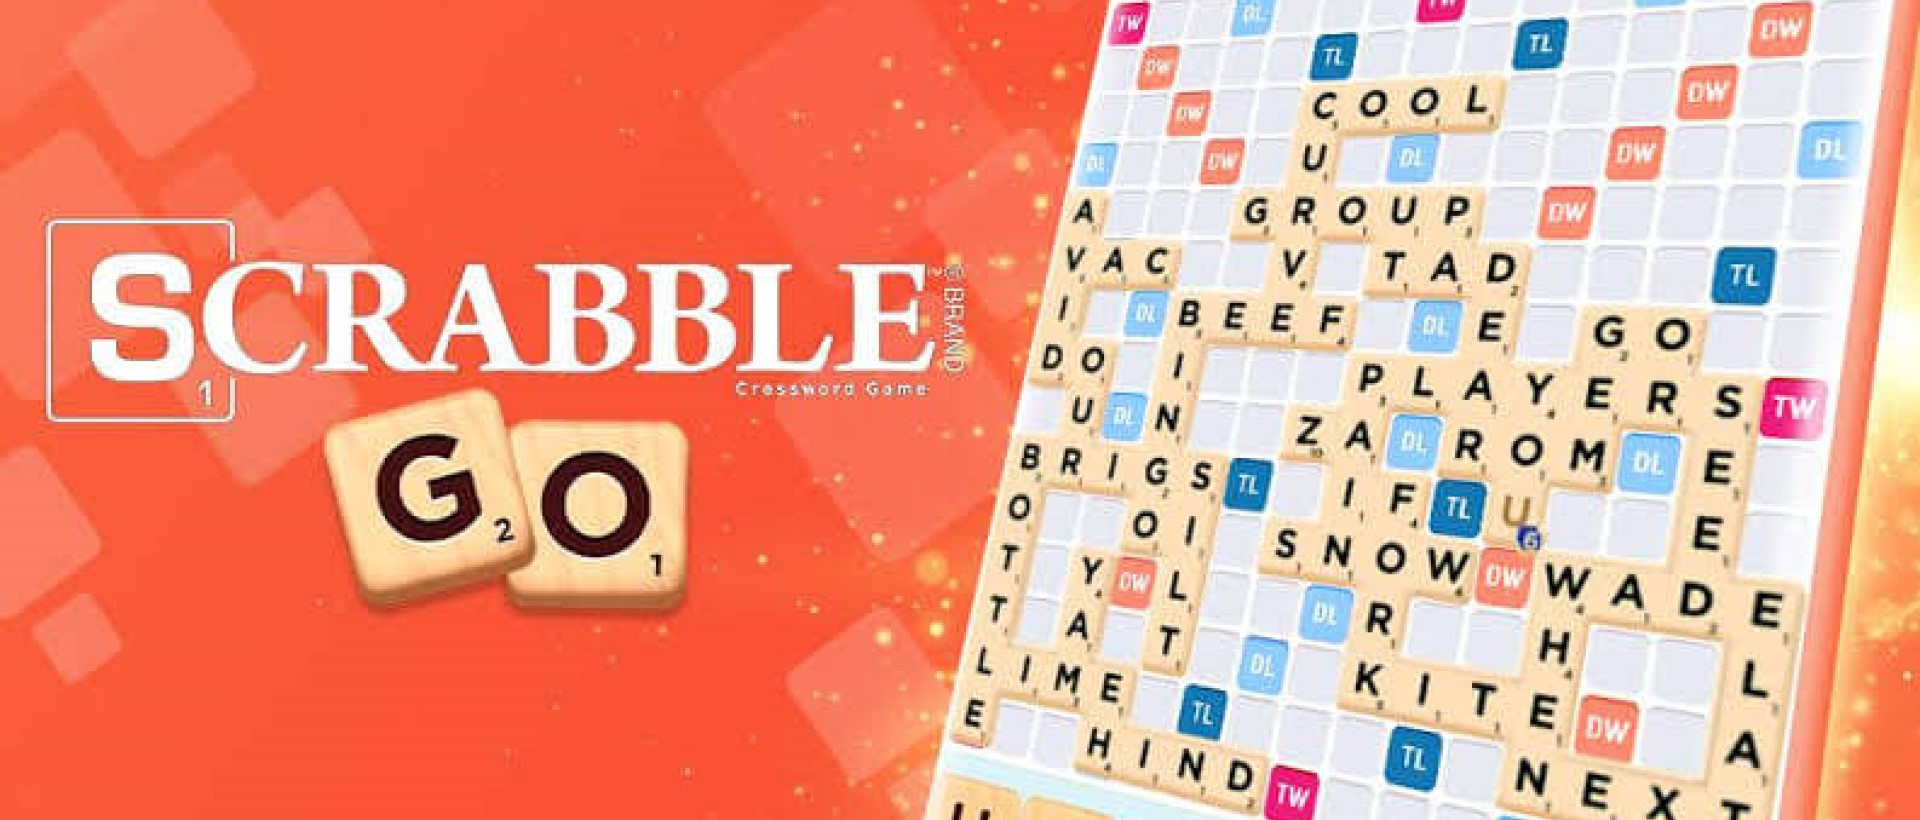 Scrabble For PC Free Download